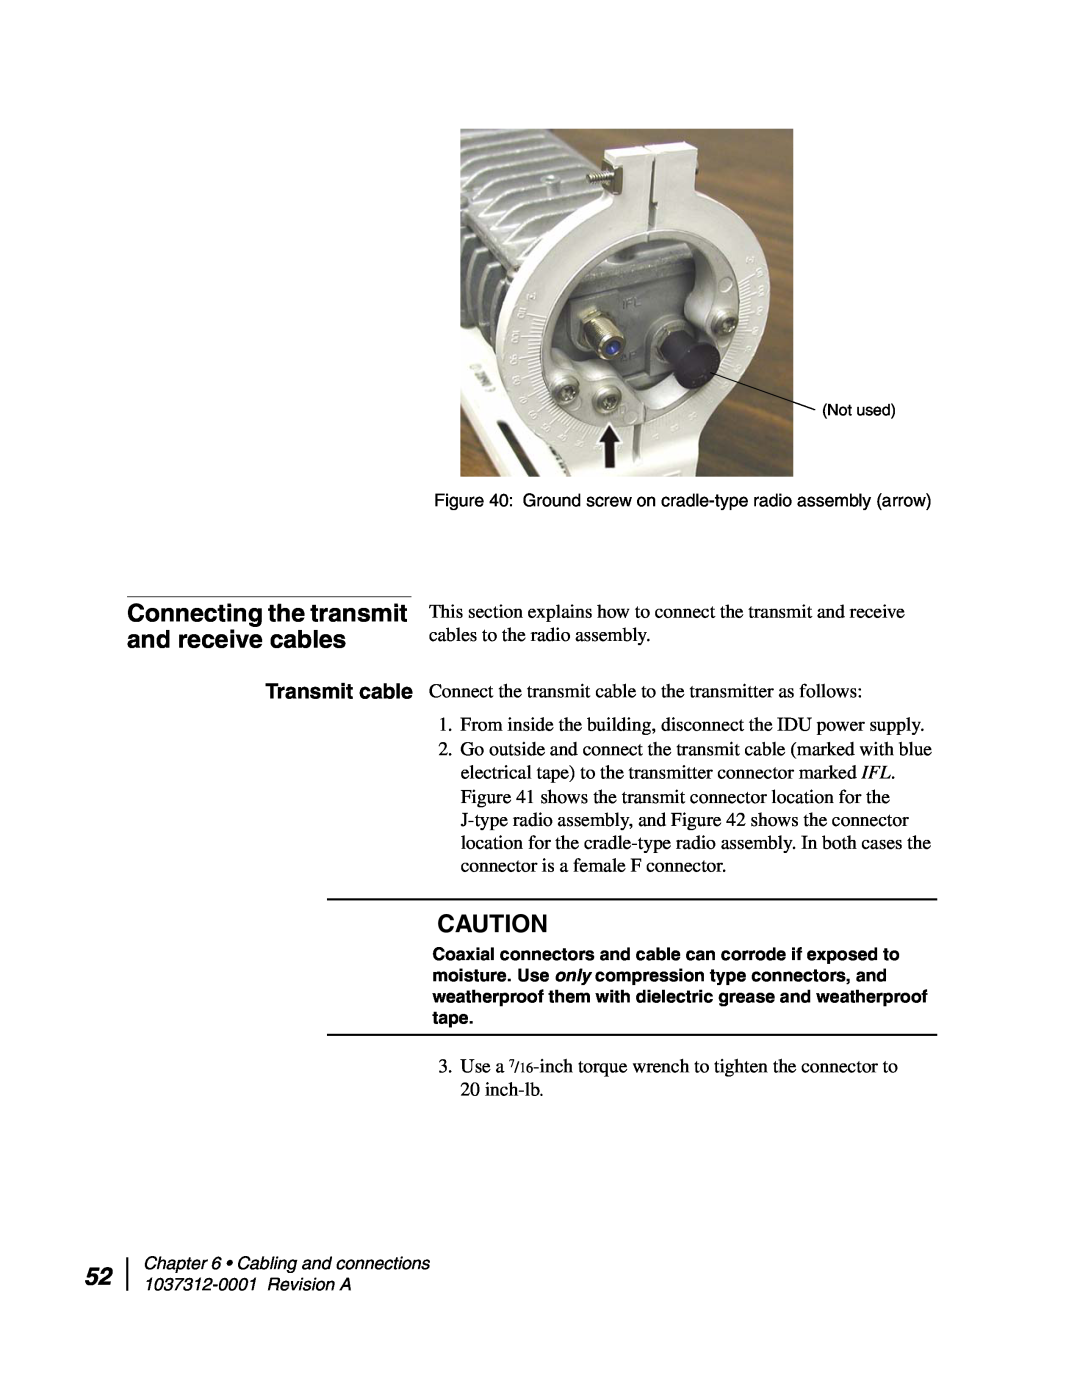 Hughes AN6-098P installation manual Connecting the transmit and receive cables, Transmit cable 